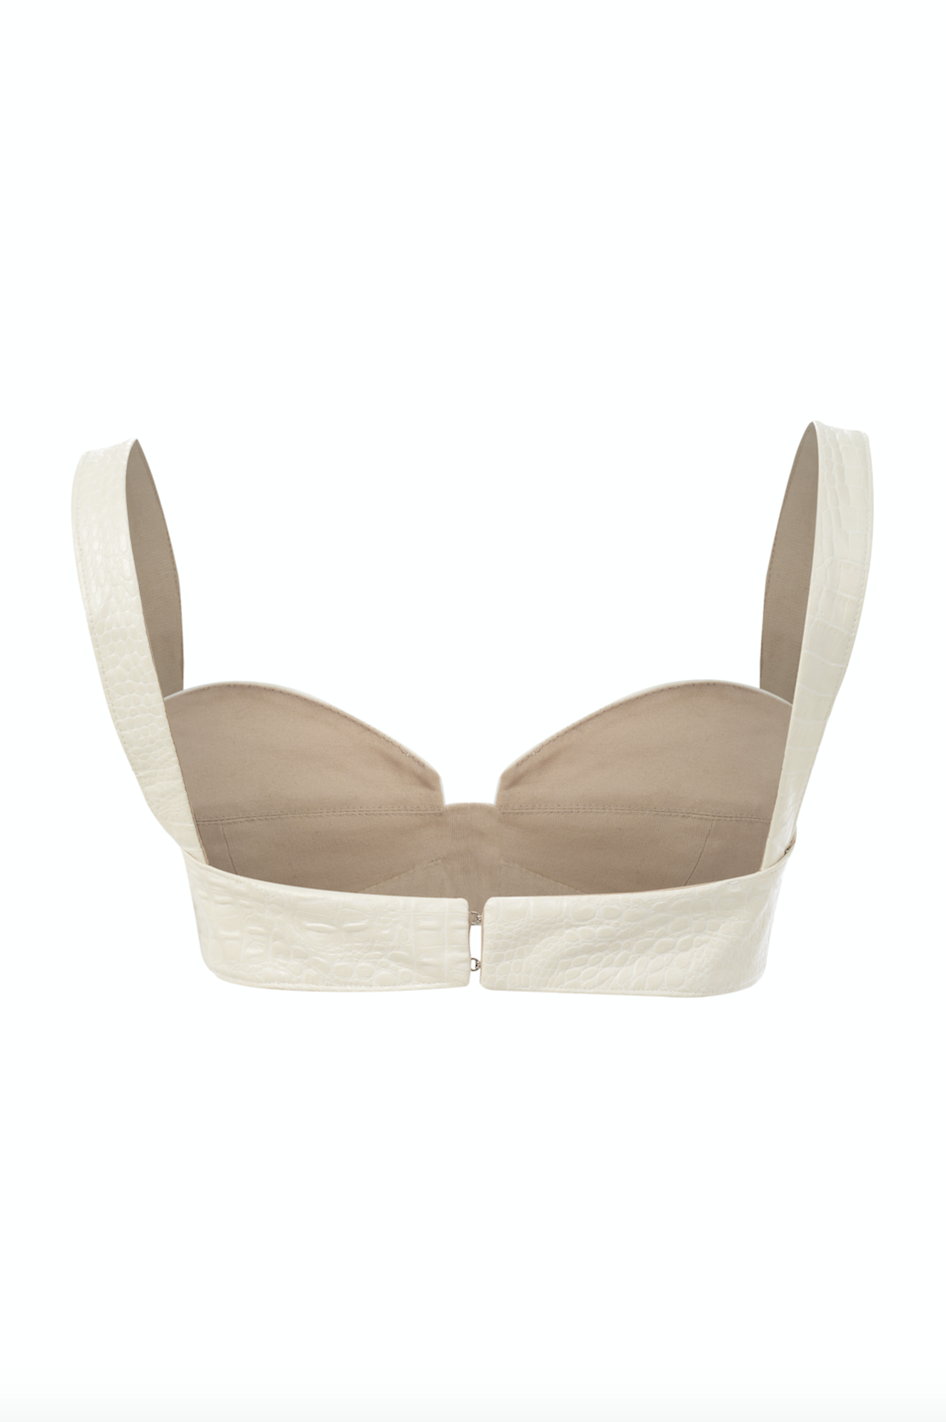 Pearl white faux crocodile leather bralette with a hook and eye closure.  